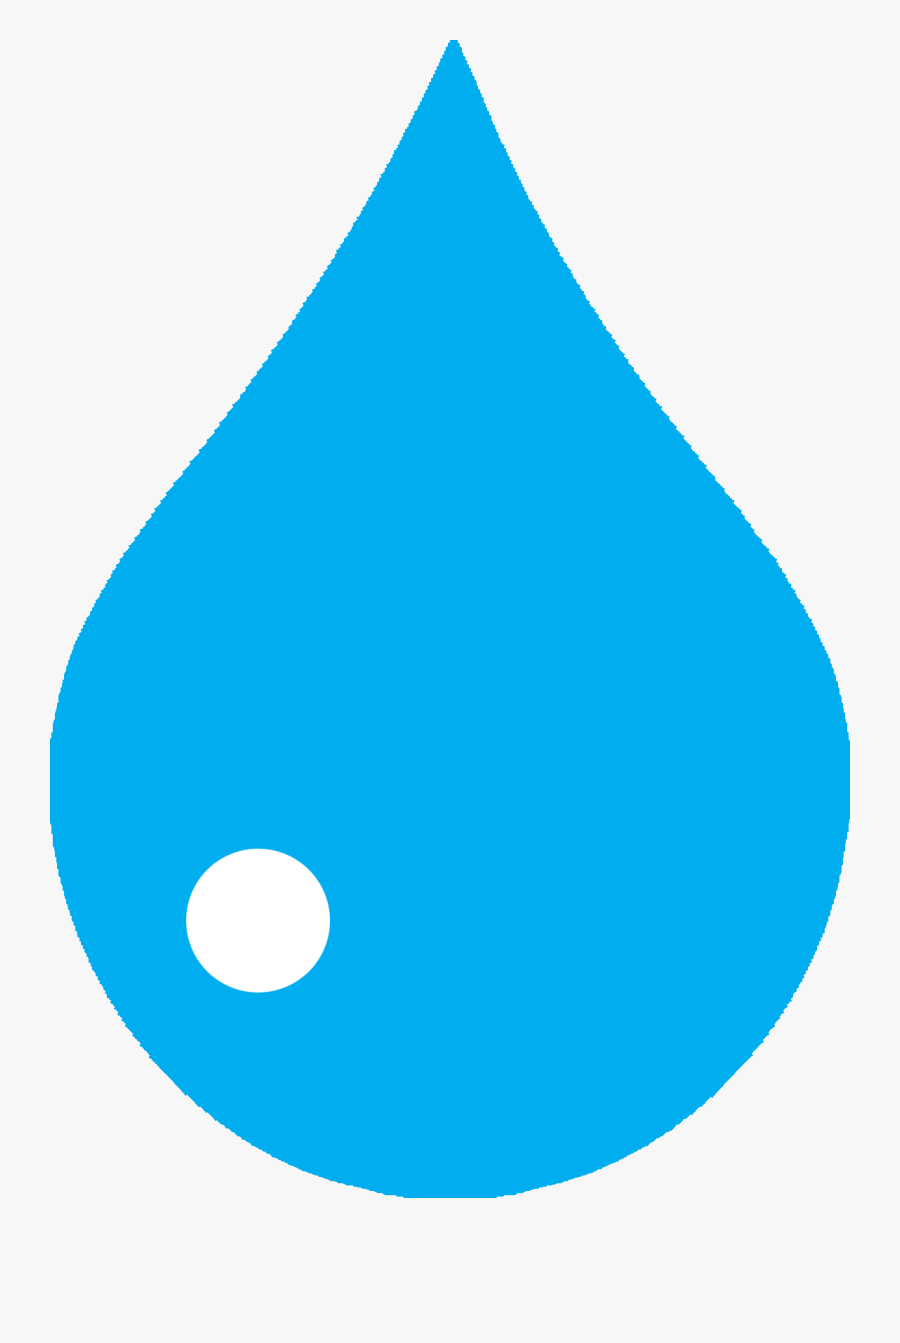 Anime Water Drop Png, Transparent Clipart